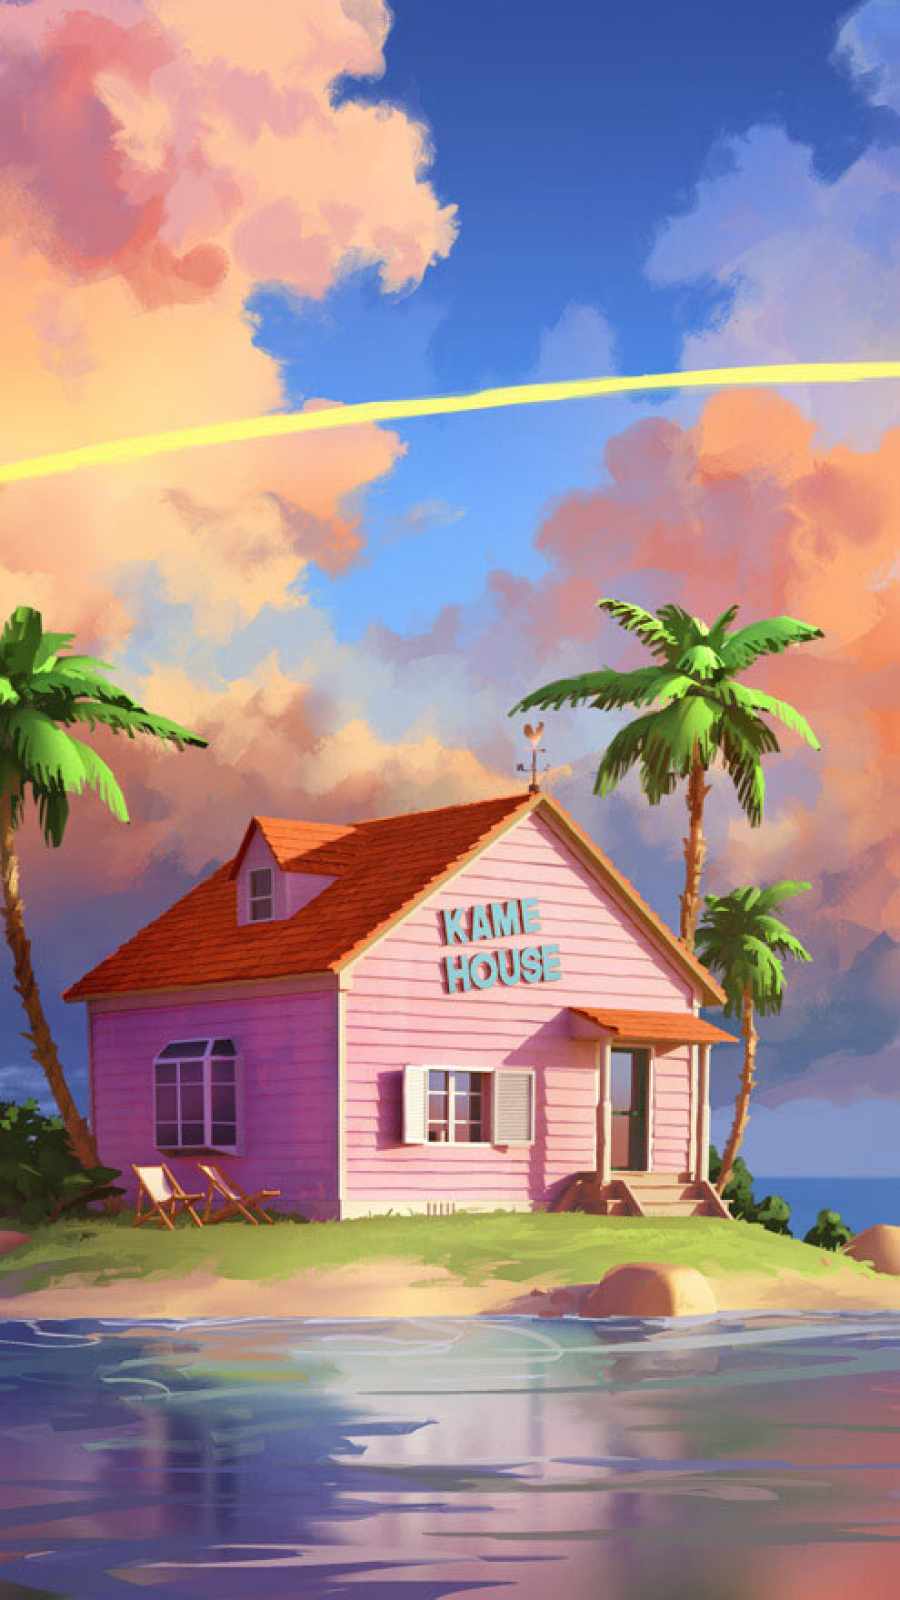 Kame House iPhone Wallpaper